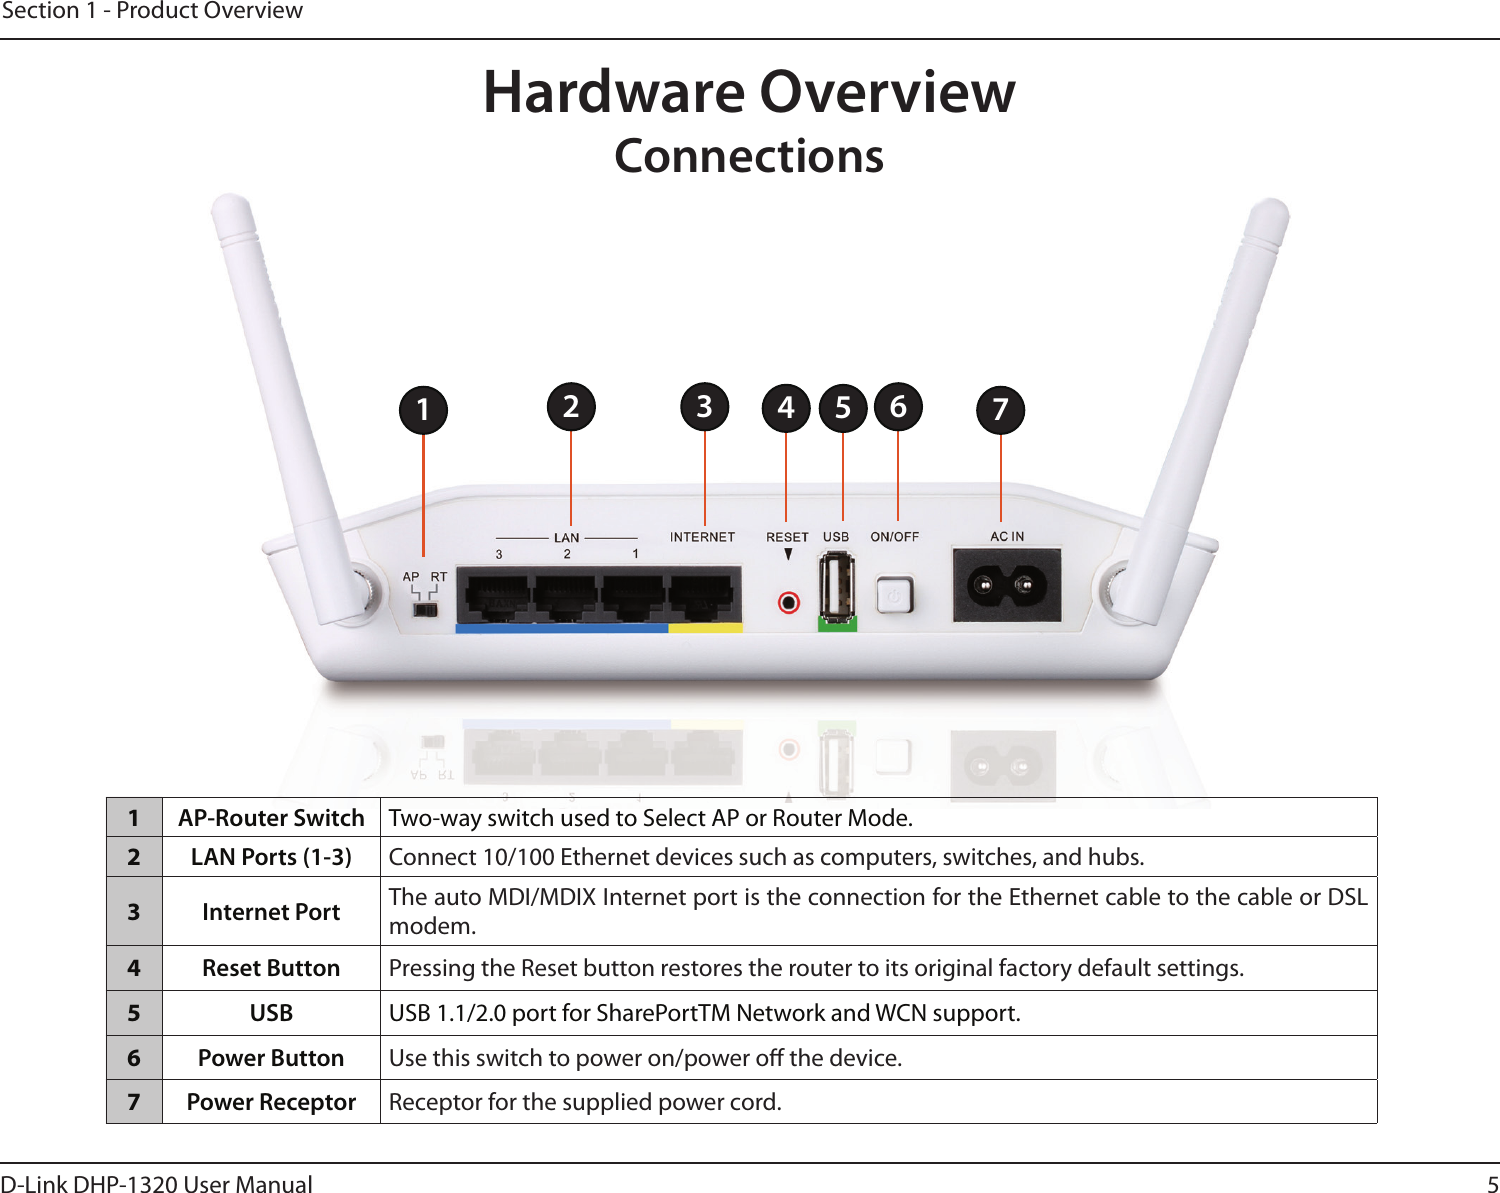 5D-Link DHP-1320 User ManualSection 1 - Product OverviewHardware OverviewConnections1AP-Router Switch Two-way switch used to Select AP or Router Mode.2LAN Ports (1-3) Connect 10/100 Ethernet devices such as computers, switches, and hubs.3Internet Port The auto MDI/MDIX Internet port is the connection for the Ethernet cable to the cable or DSL modem.4Reset Button Pressing the Reset button restores the router to its original factory default settings.5USB USB 1.1/2.0 port for SharePortTM Network and WCN support.6Power Button Use this switch to power on/power o the device.7Power Receptor Receptor for the supplied power cord.2 3 4561 7